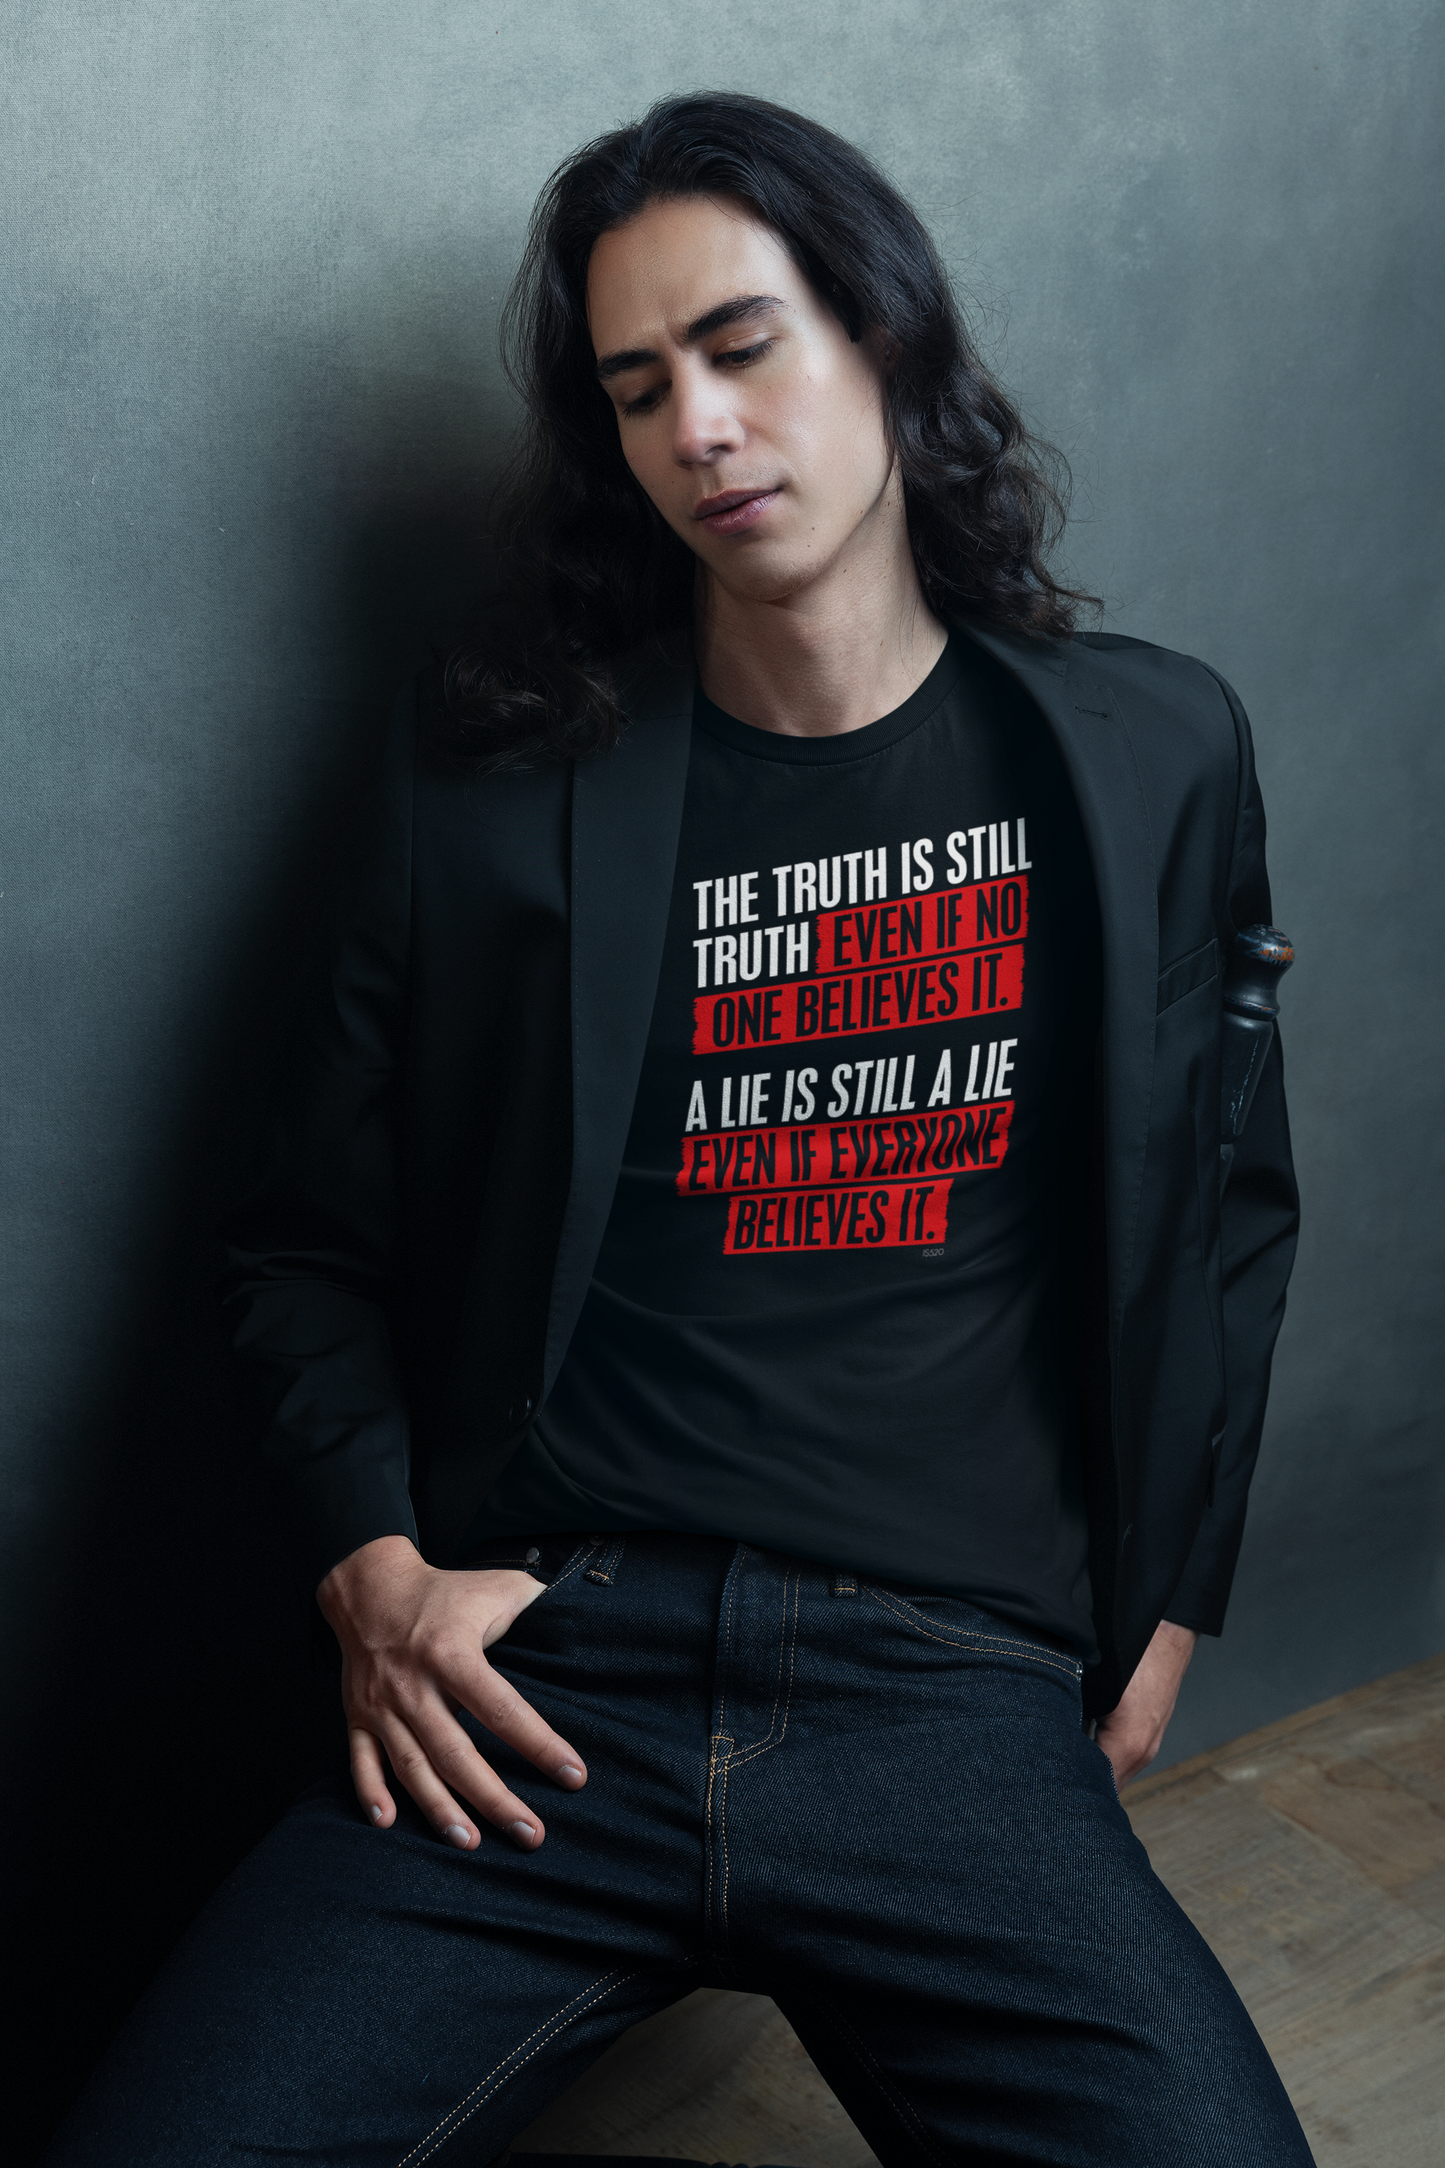 The Truth is still the Truth. T Shirt.